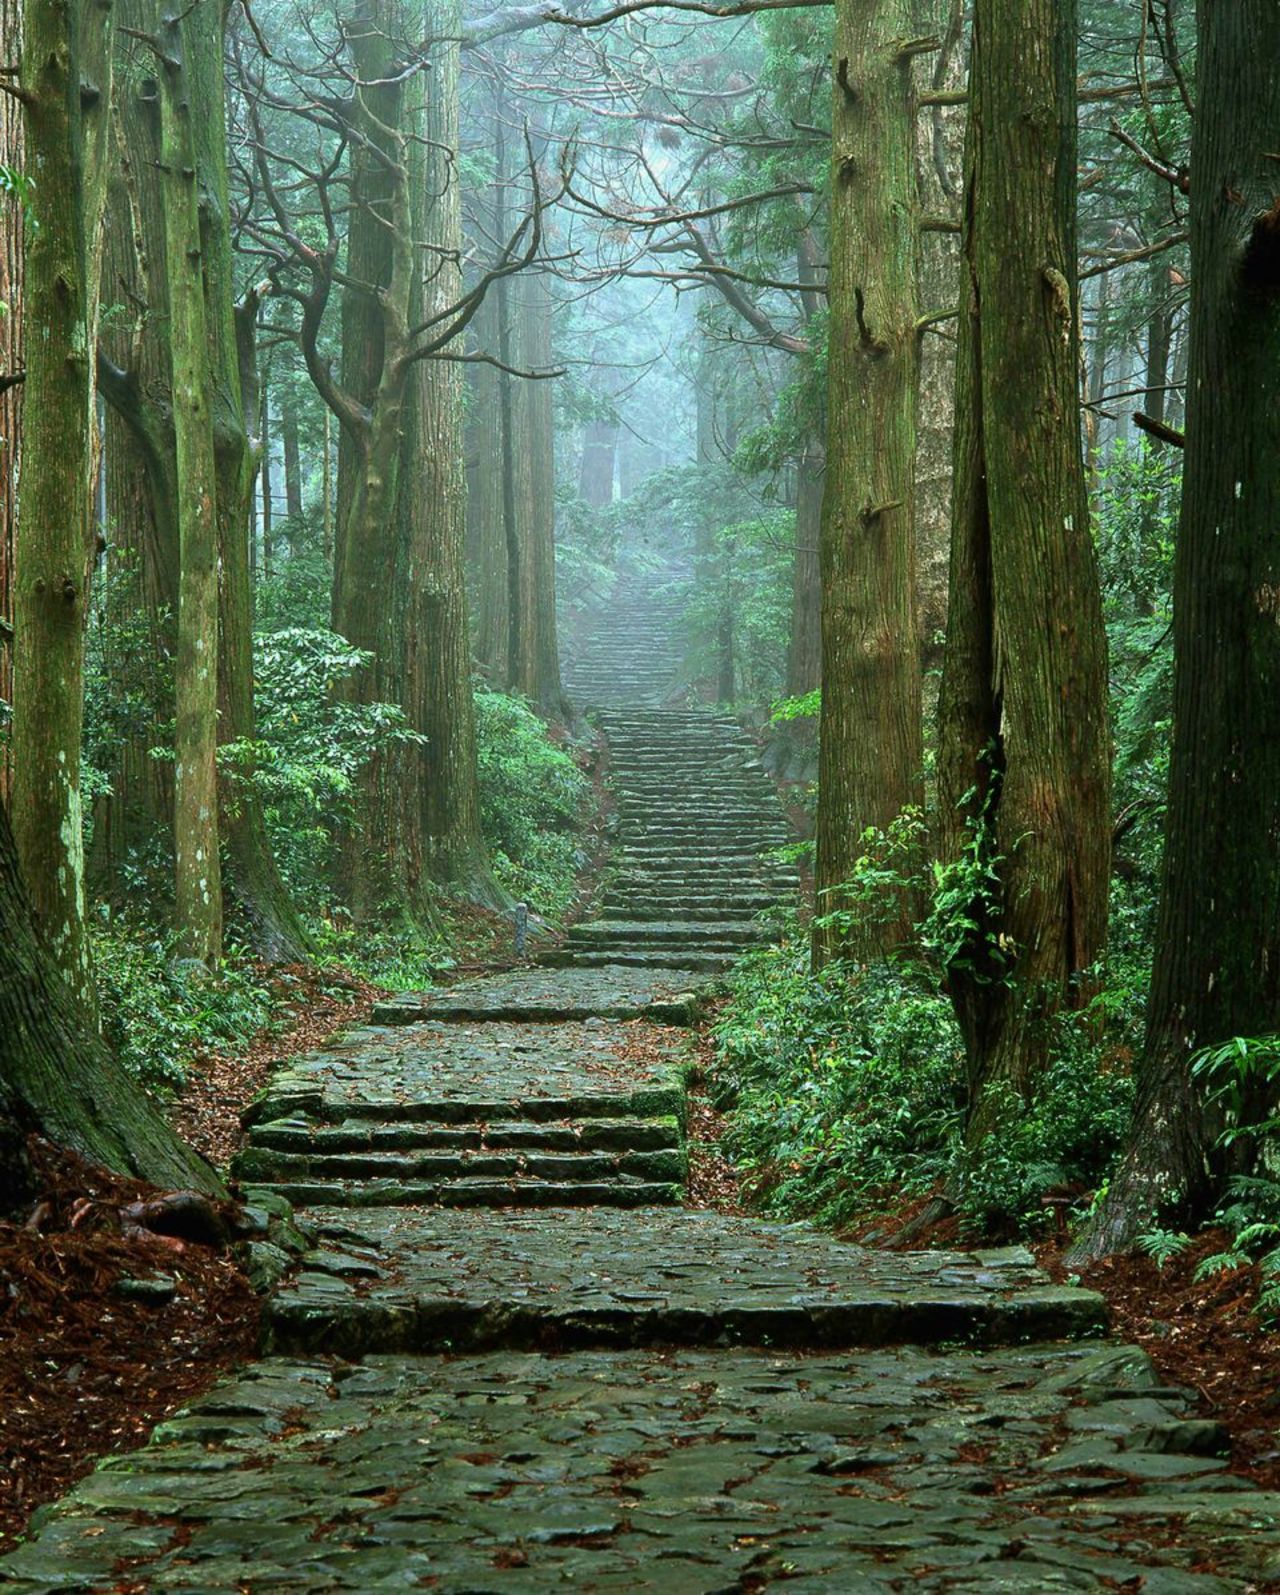 Daimonzaka. For those who've always wanted to feel like they're on a "Lord of the Rings" set. In Japan.